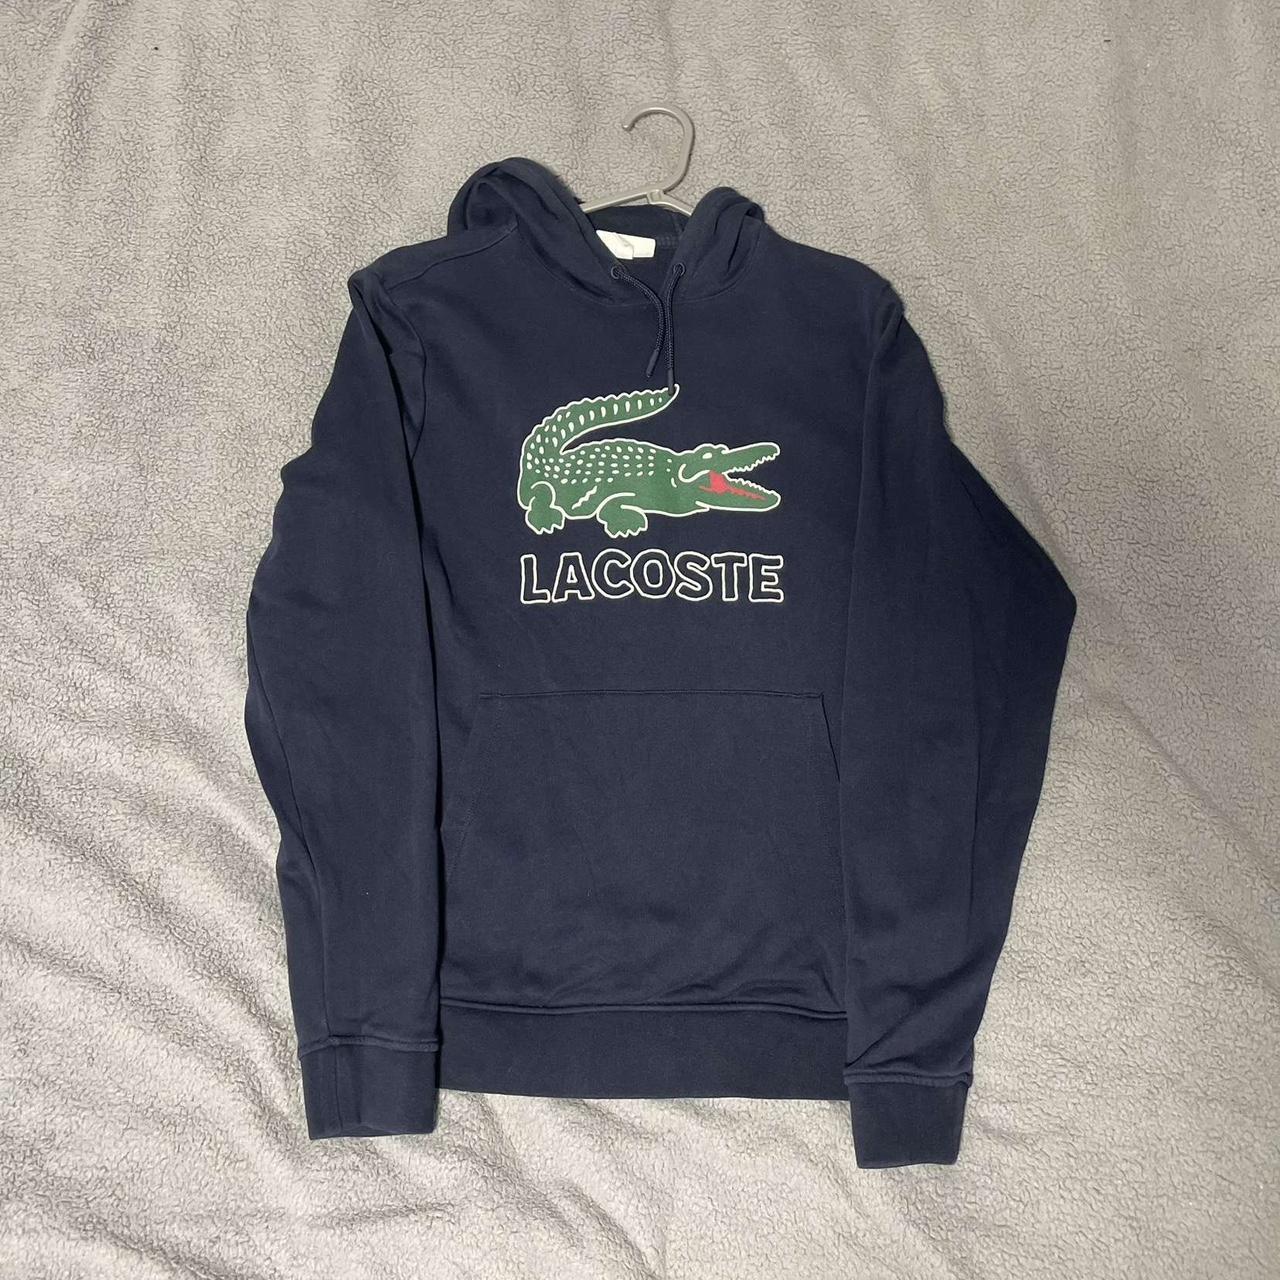 Lacoste hoodie small men’s like new involved - Depop